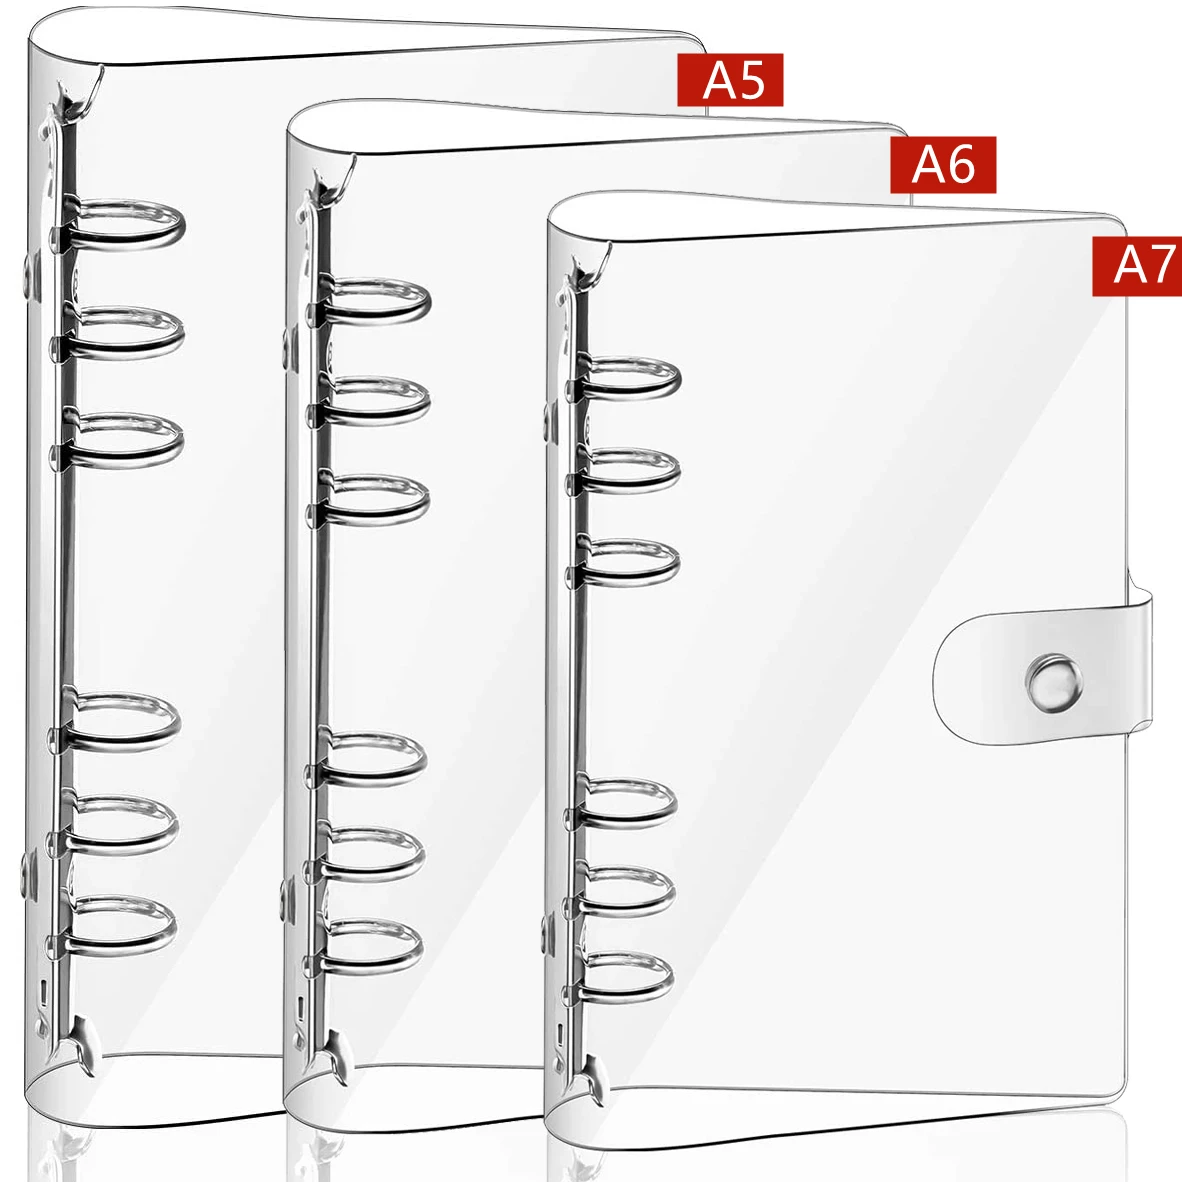 A7 A6 A5 Transparent Soft PVC 6-Ring Binder Cover Snap Button Close Case for 6 Hole Refill Insert Filler Paper Loose Leaf Binder